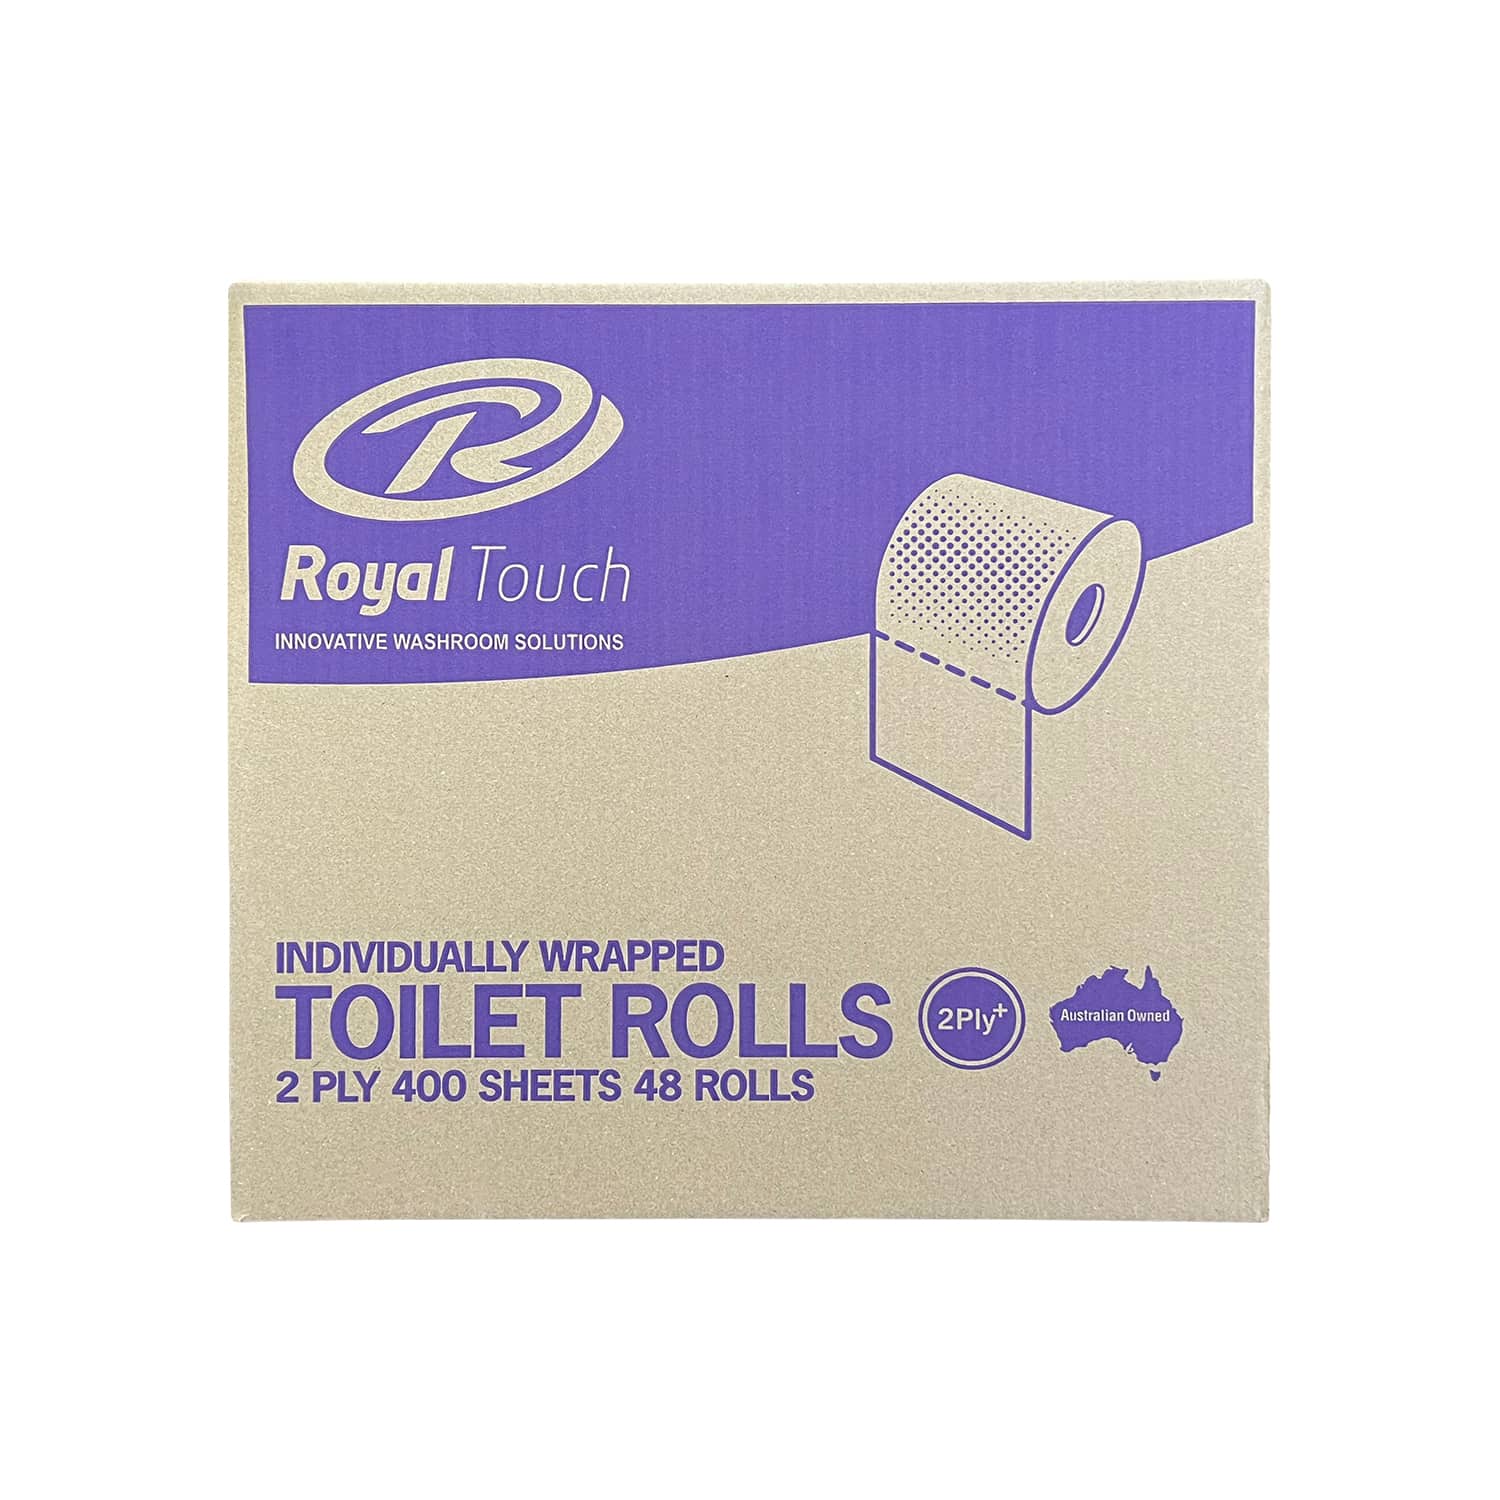 Carton Of Individually Wrapped 2Ply 400 Sheet Toilet Rolls